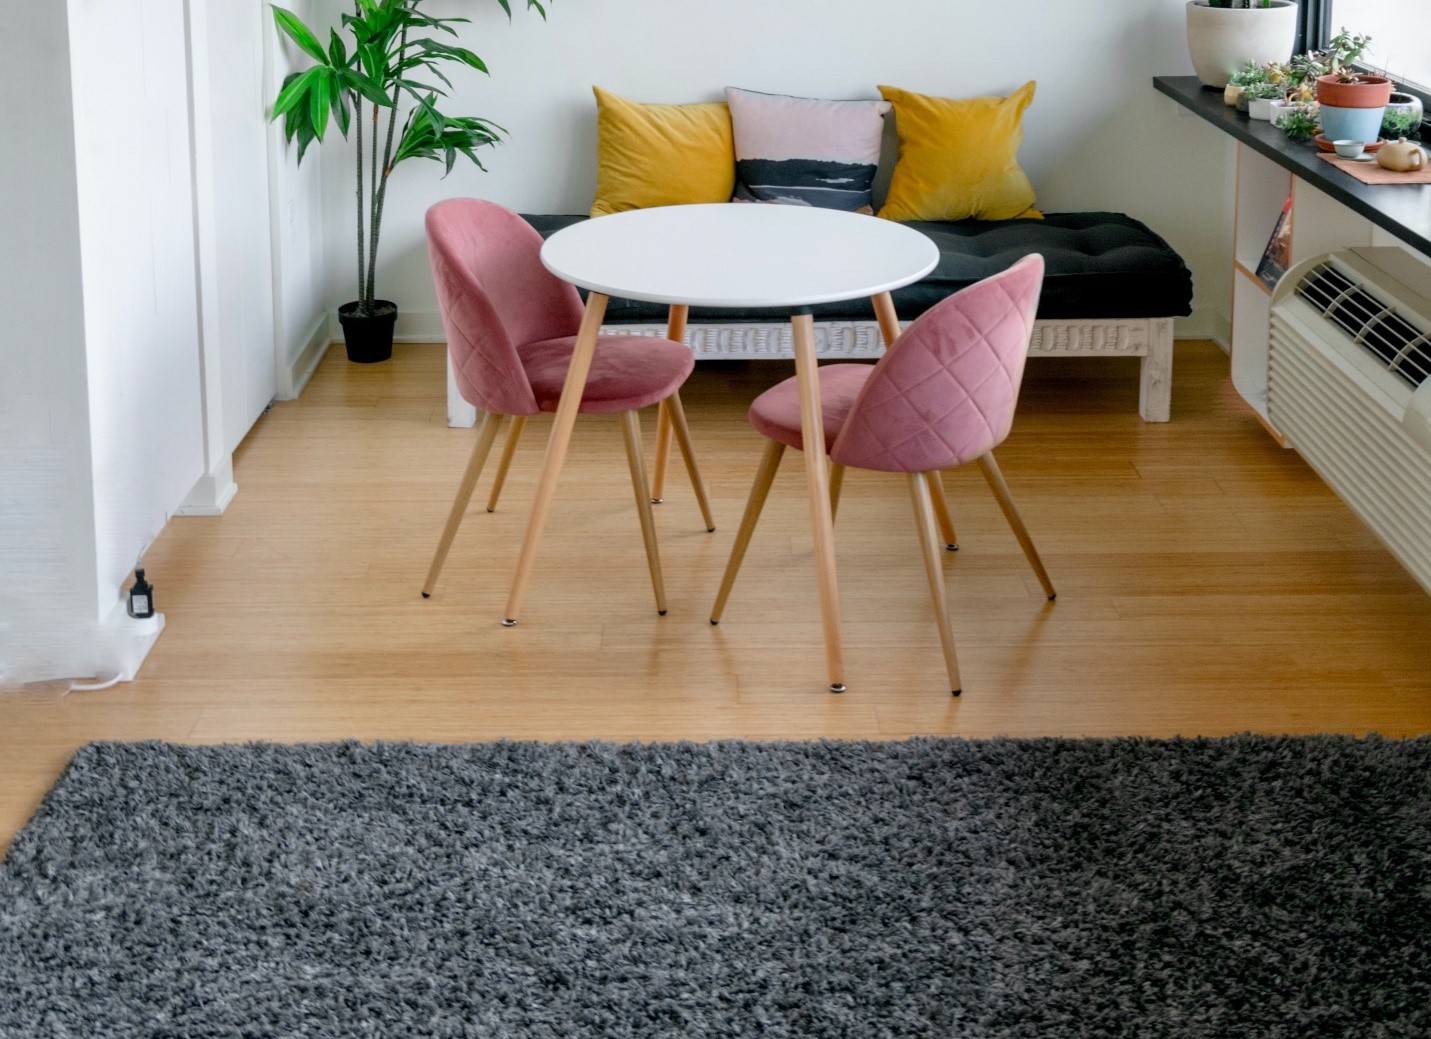 How to Use Rugs to Make a Room Look Bigger or Smaller